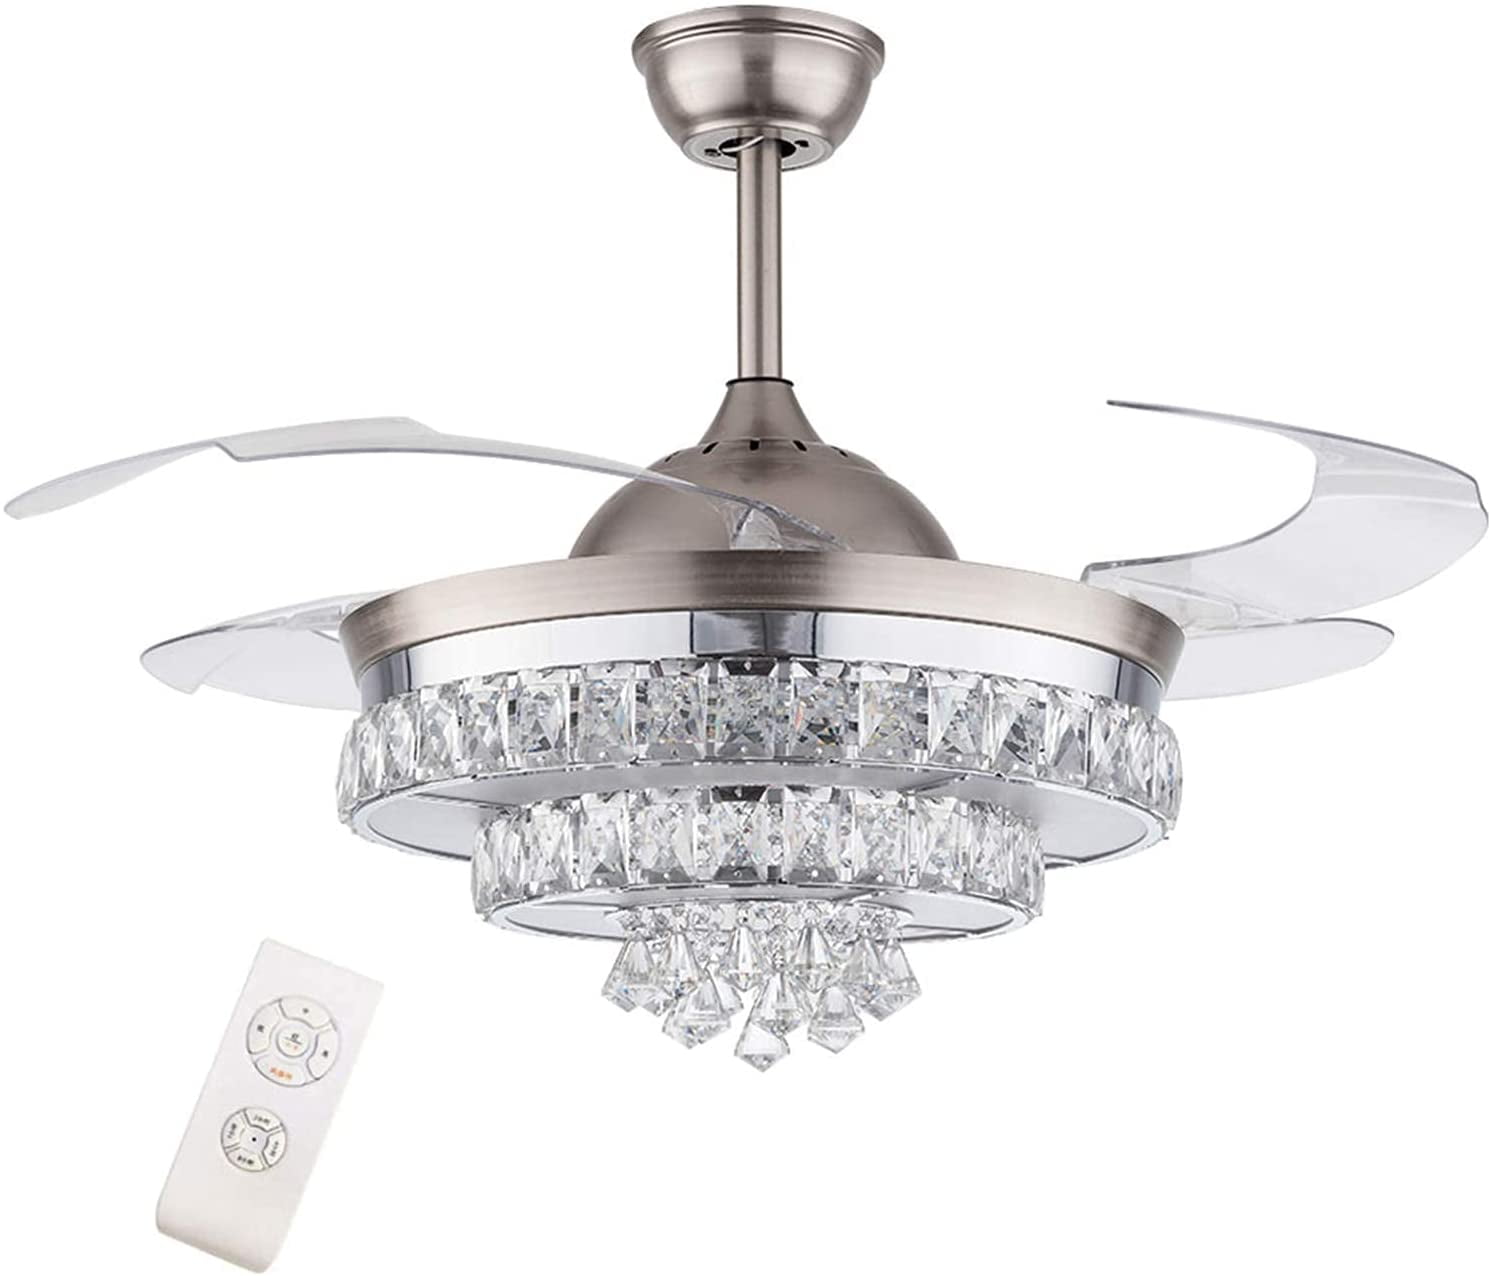 42" Retractable Ceiling Fan Crystal Chandelier Remote Invisible Blades LED Light 